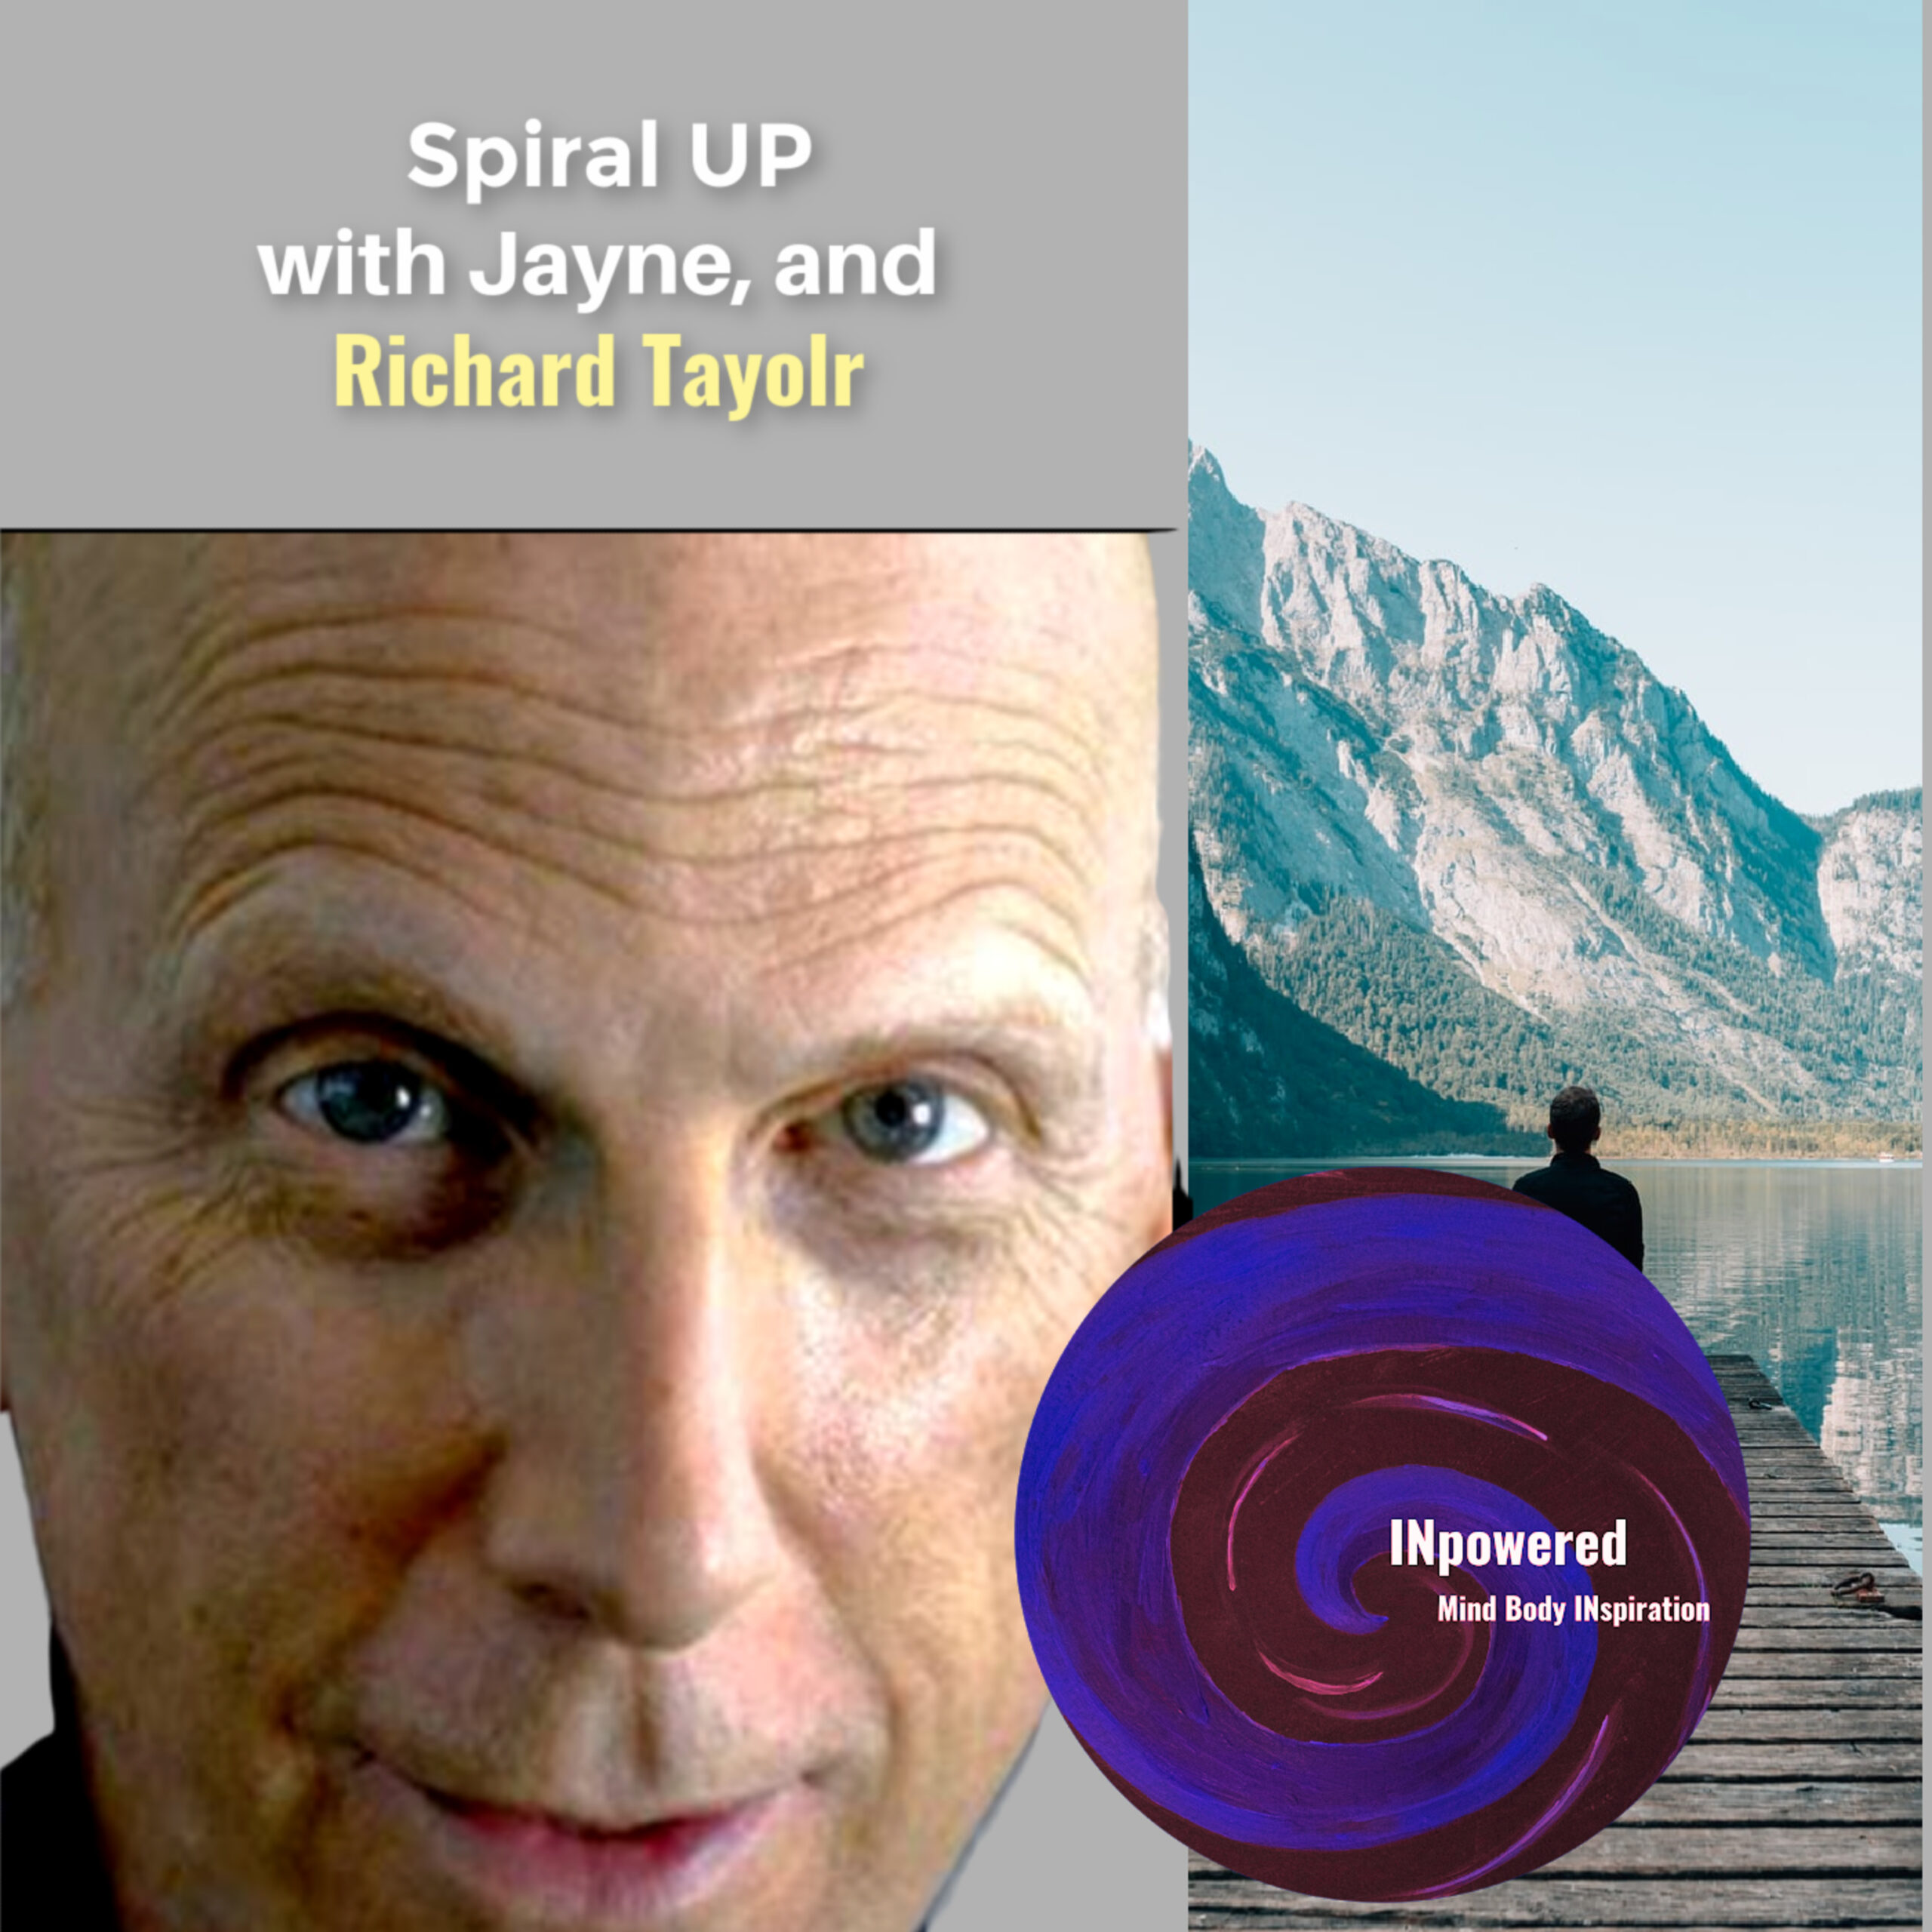 Richard Taylor – Author of “A Stress Free You.”